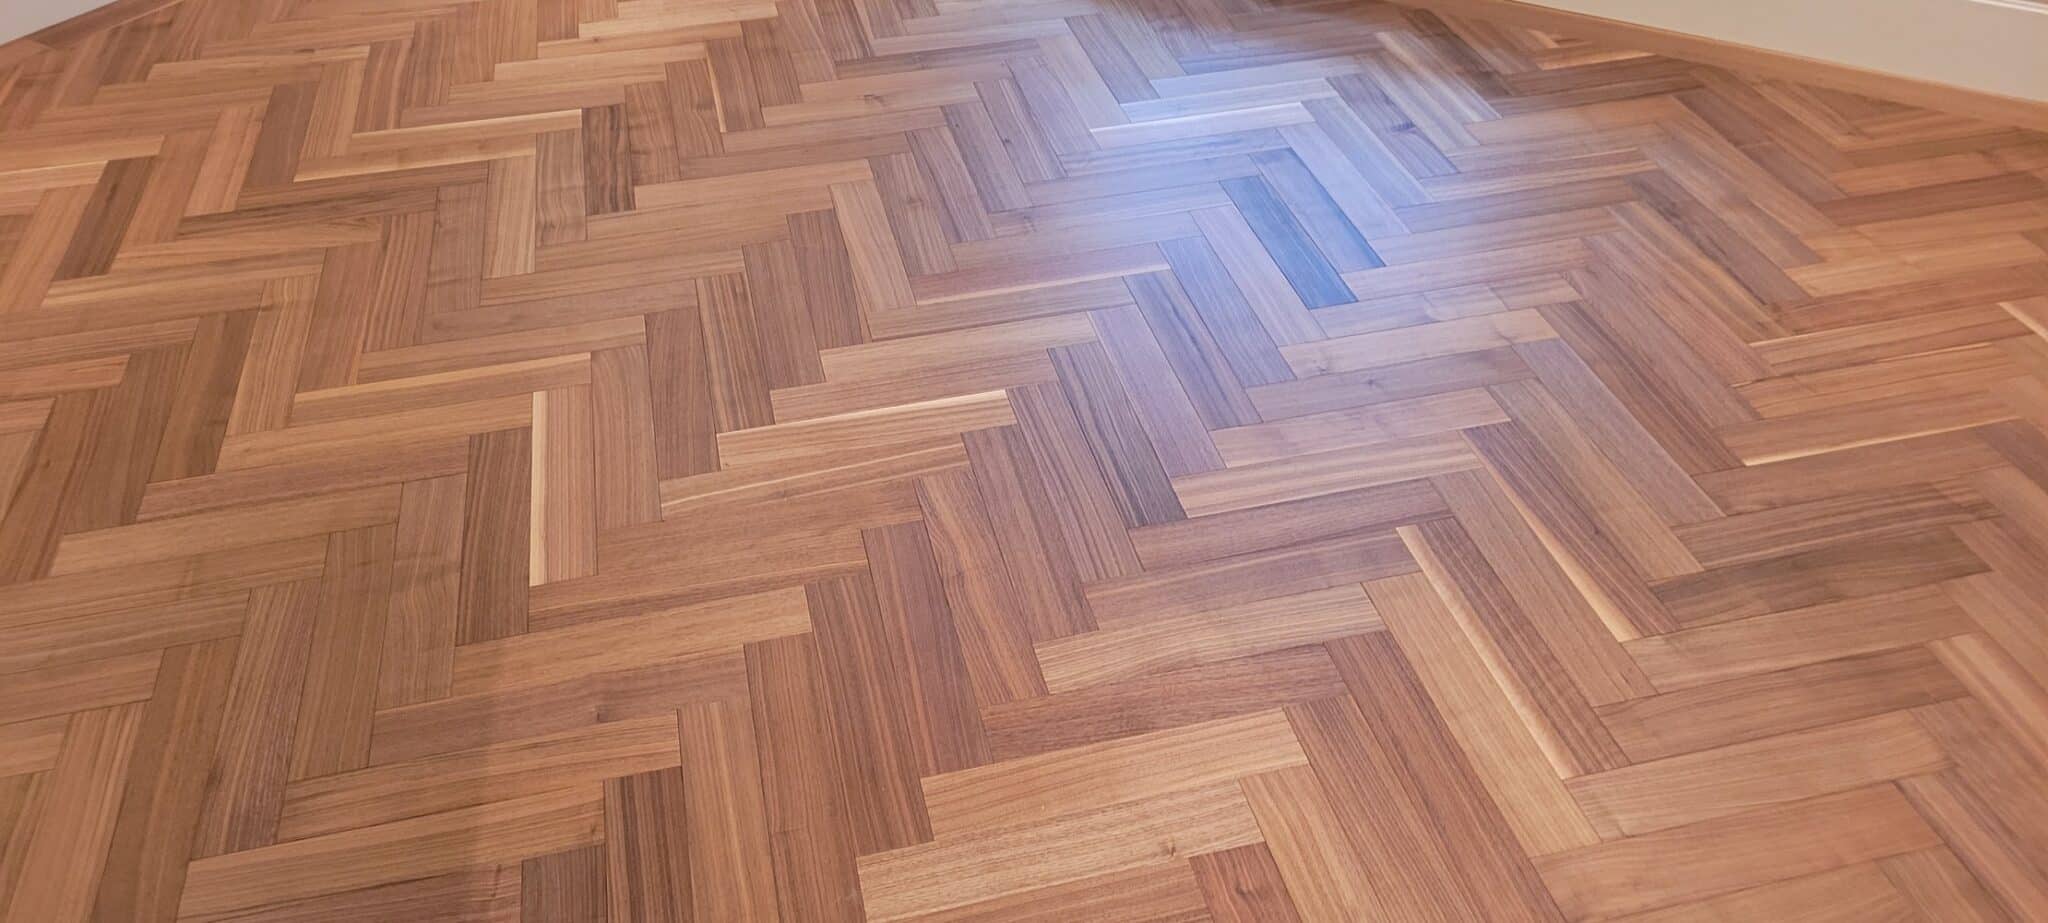 Long-lasting and beautiful wood floors in Vancouver area